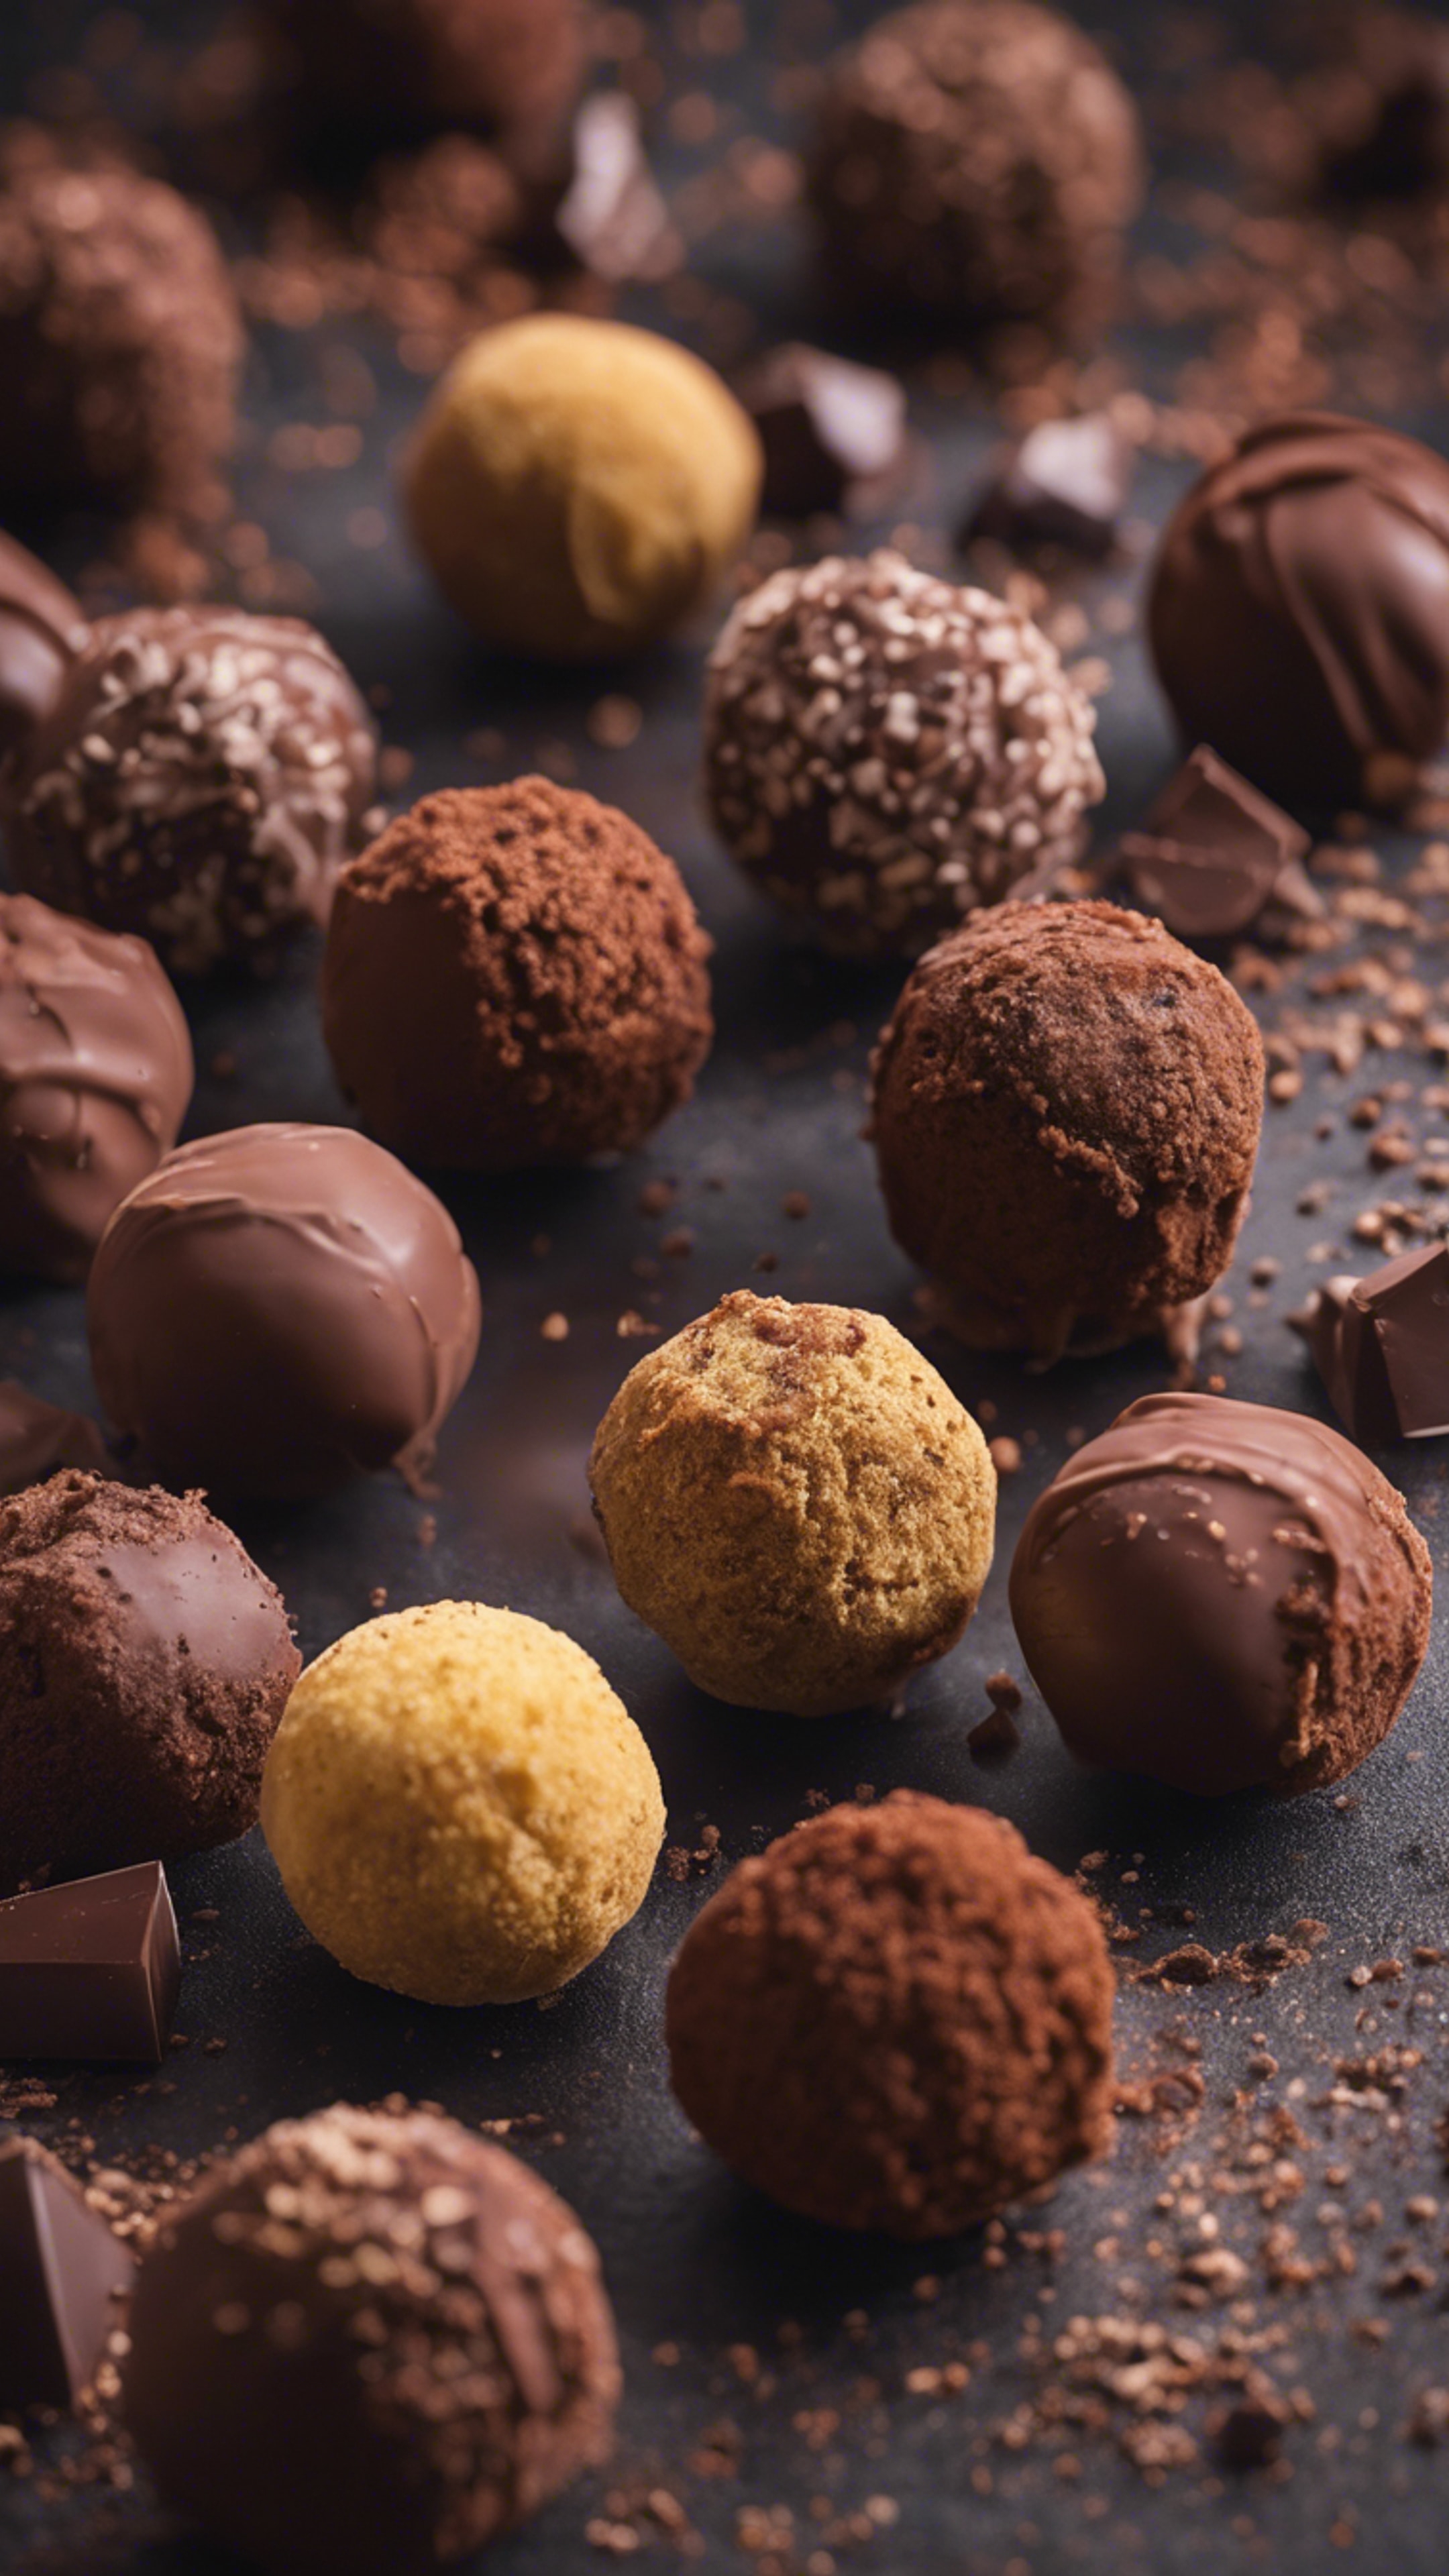 An assortment of delicious, delectable brown chocolate truffles Tapeta[070a36241272450fb9f4]